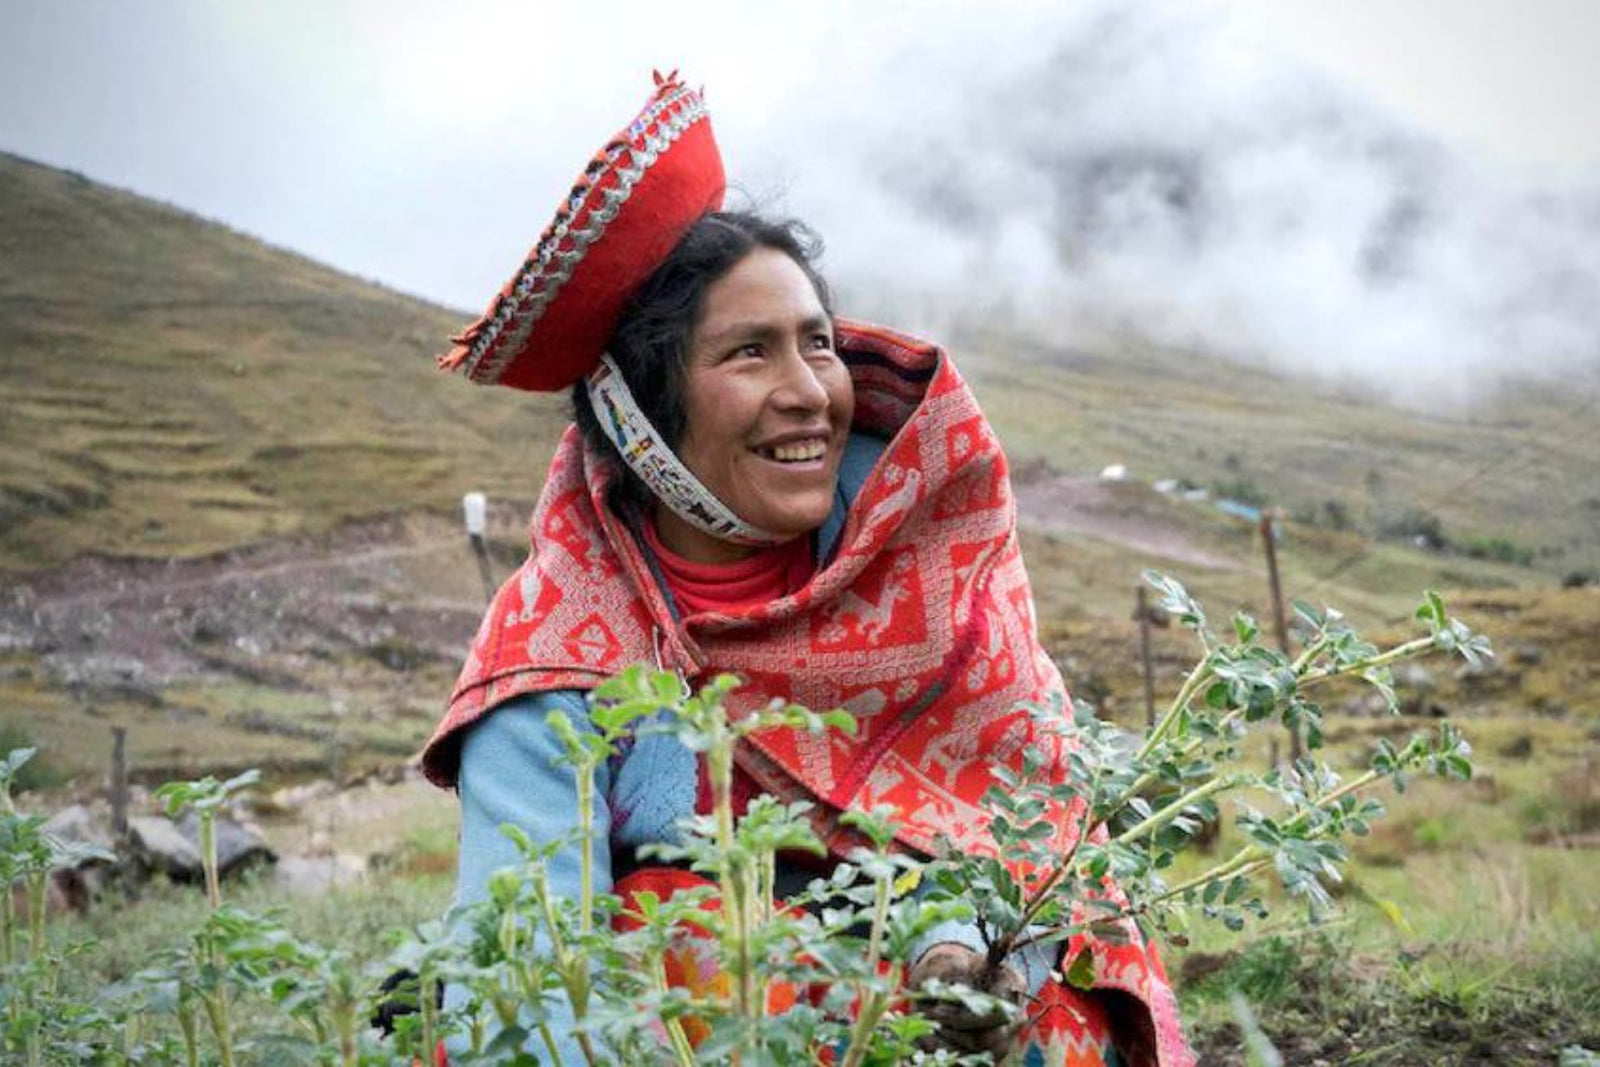 5 Ways Planting Trees Helps Gender Equality - One Tree Planted